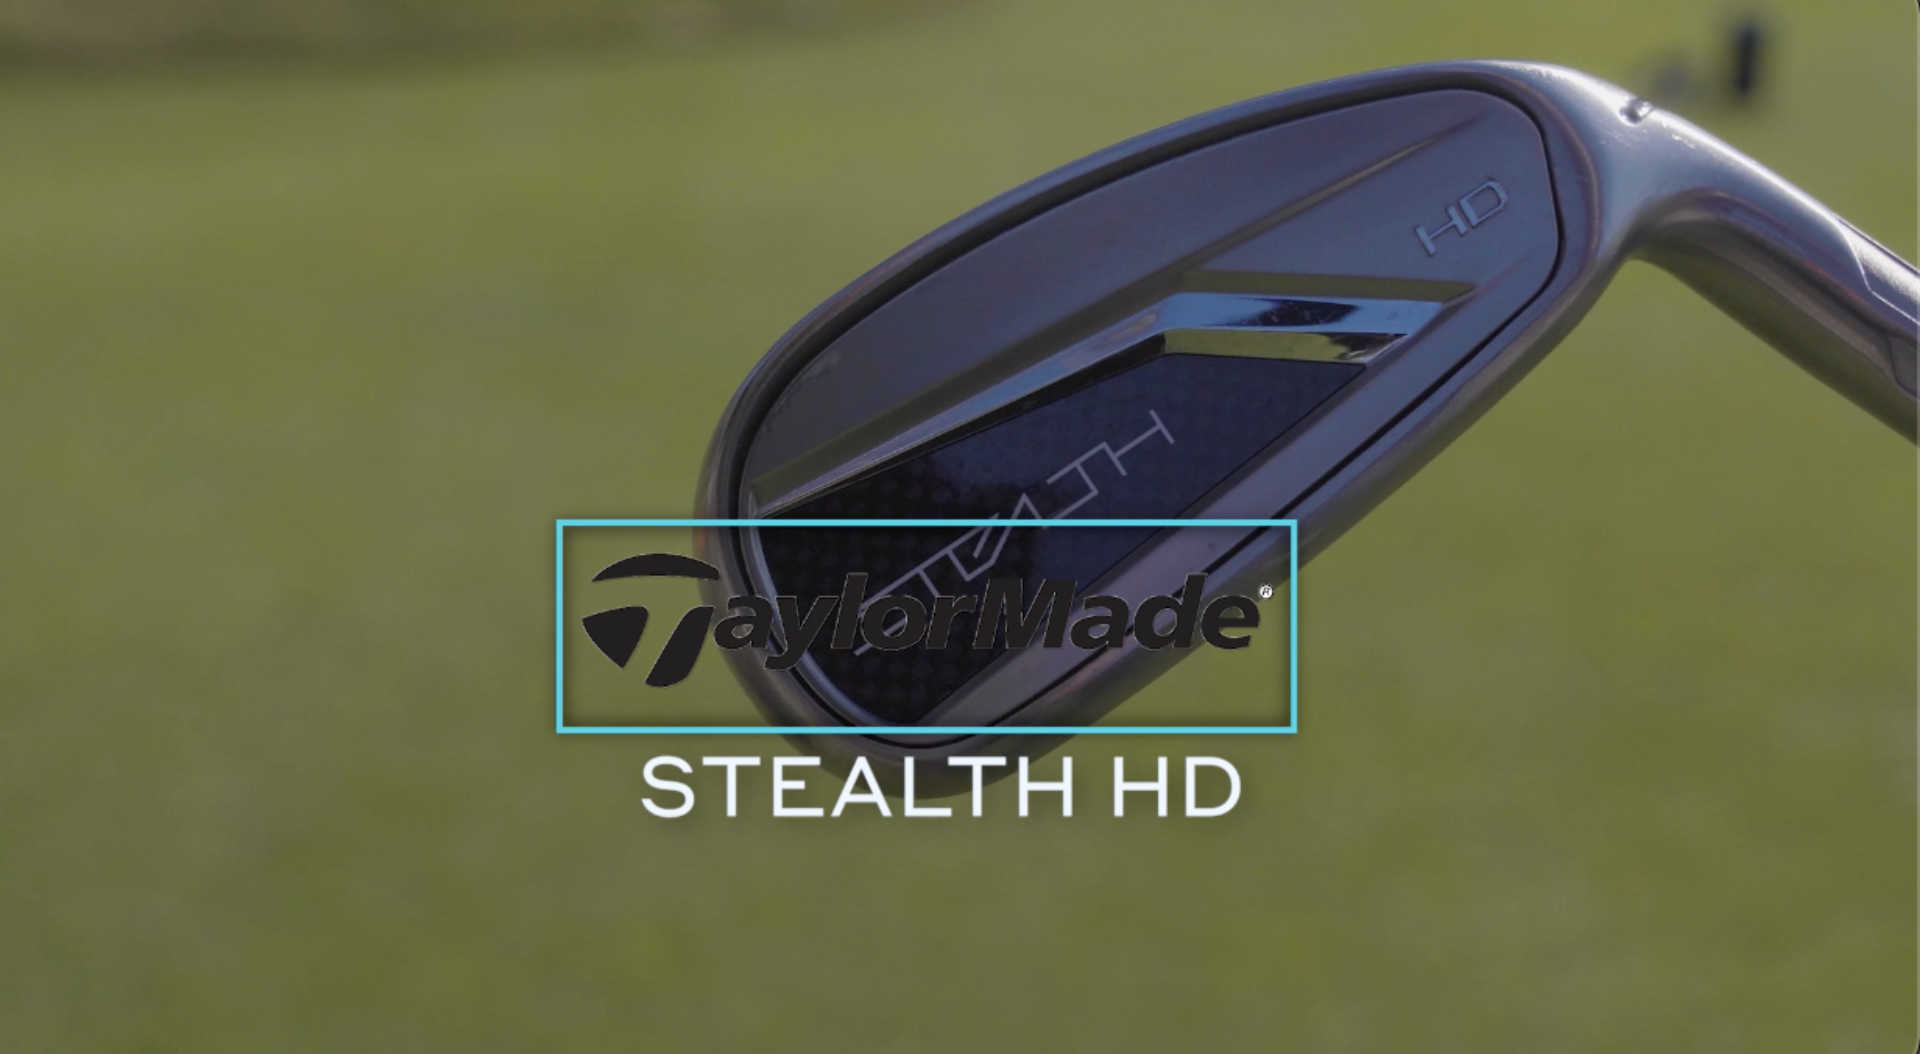 What impressed us while testing TaylorMade's new Stealth HD irons